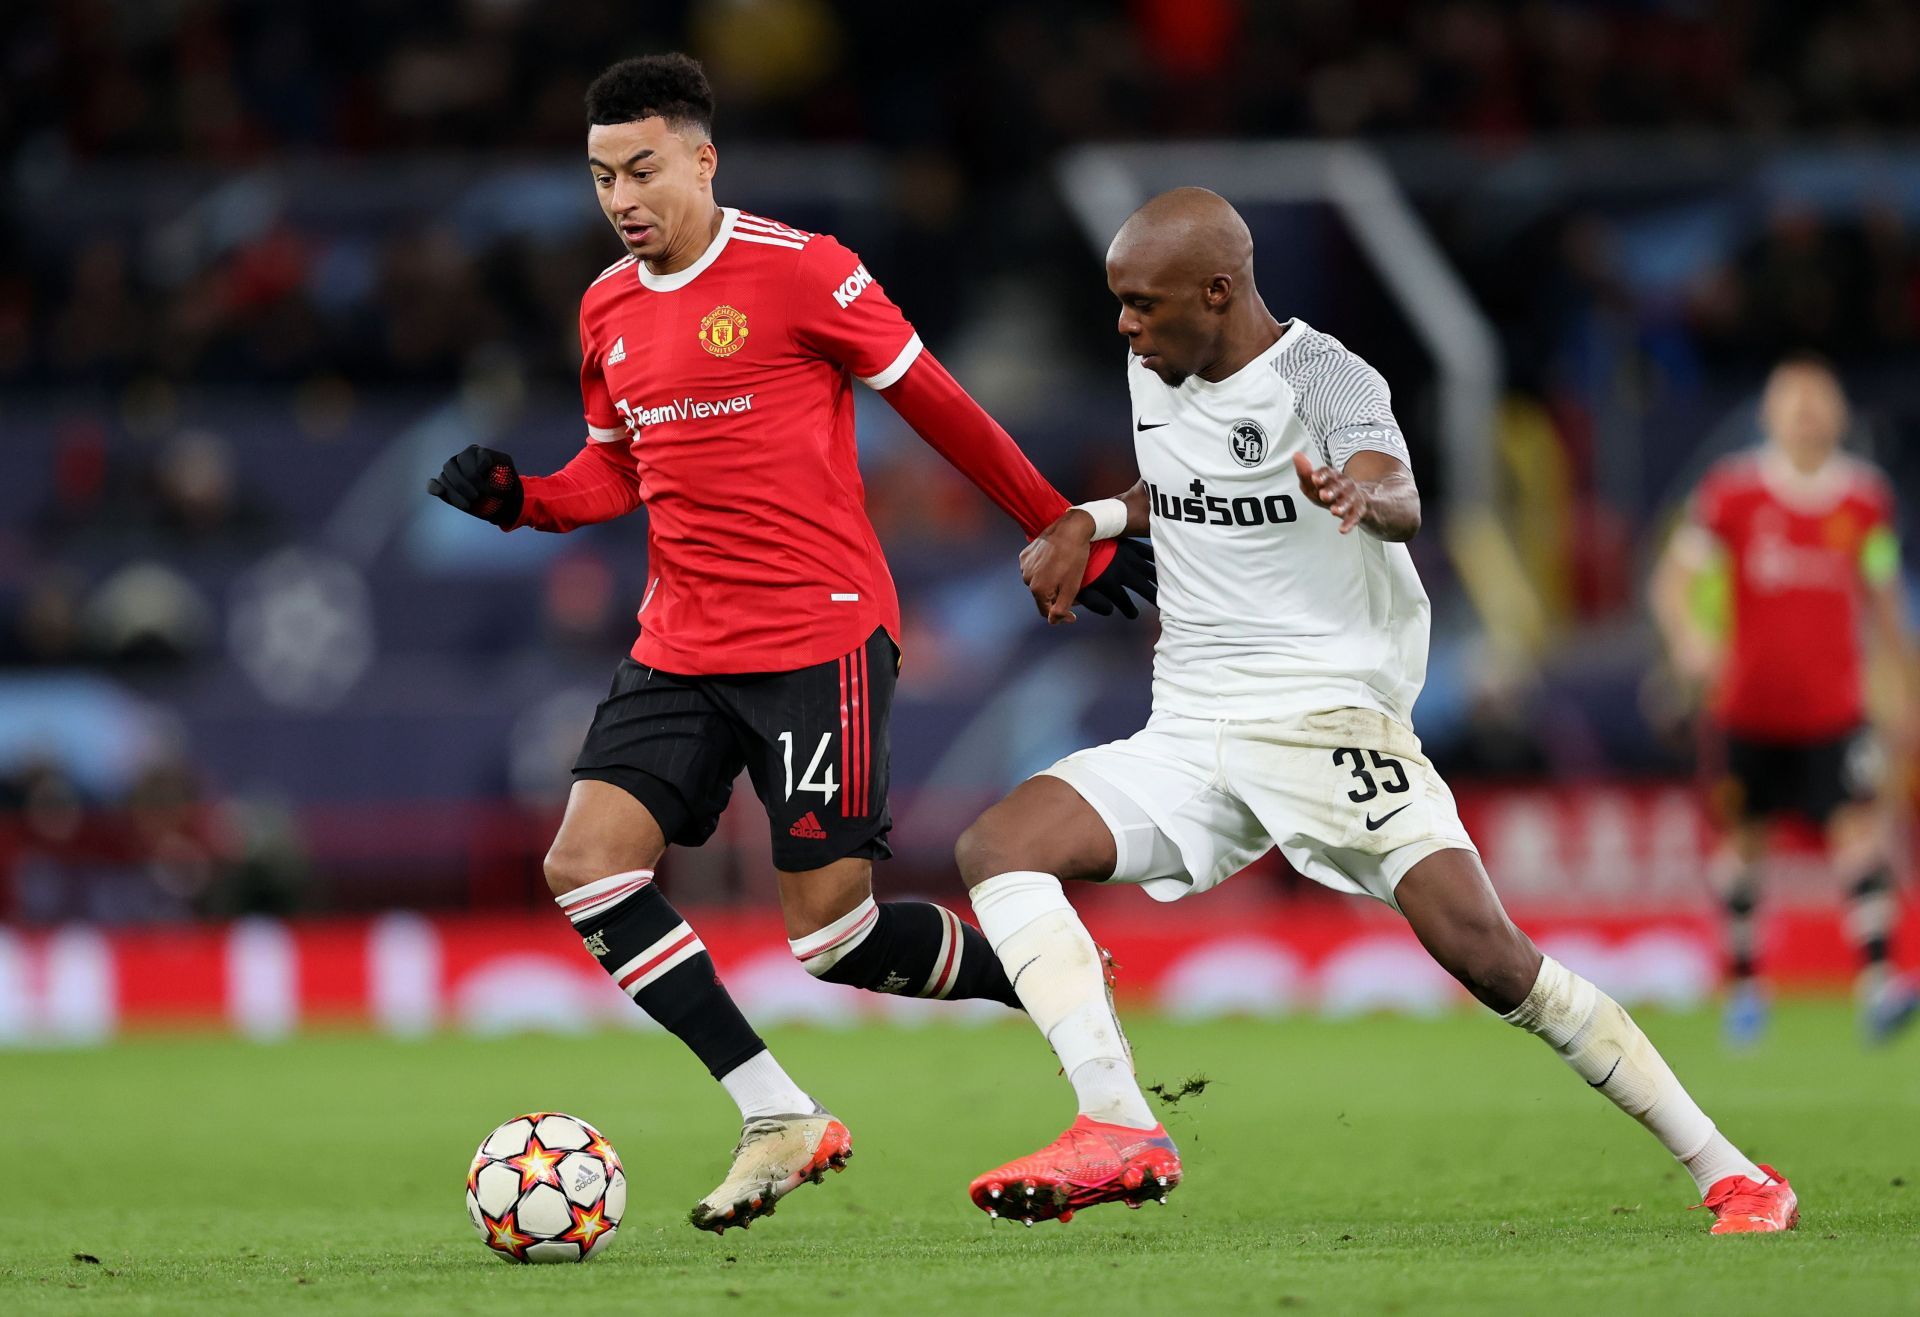 Jesse Lingard has struggled for playing time at Old Trafford